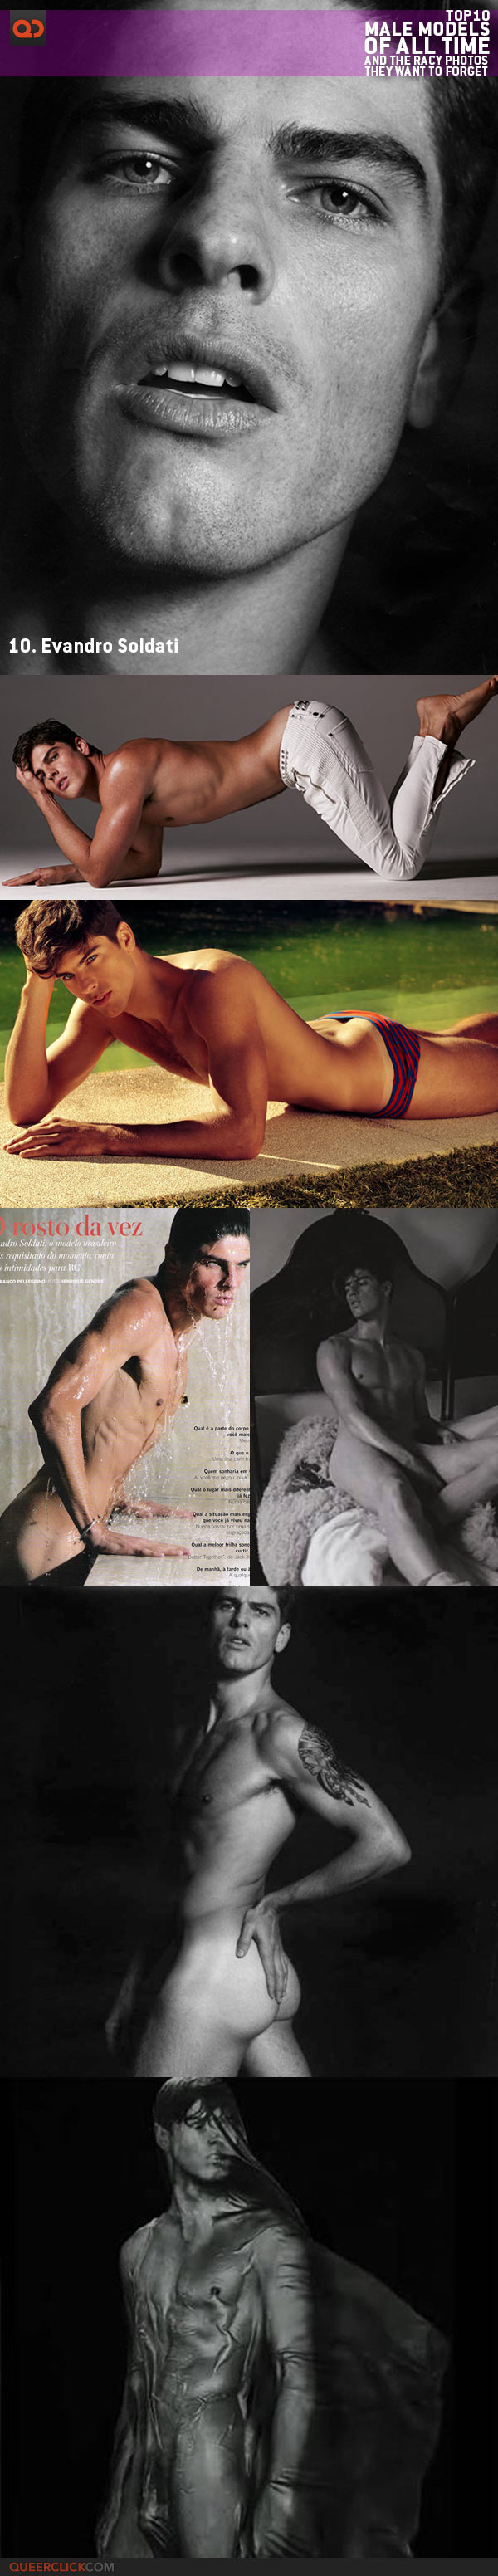 Top 10 Male Models of All Time… And The Racy Photos They Want To Forget